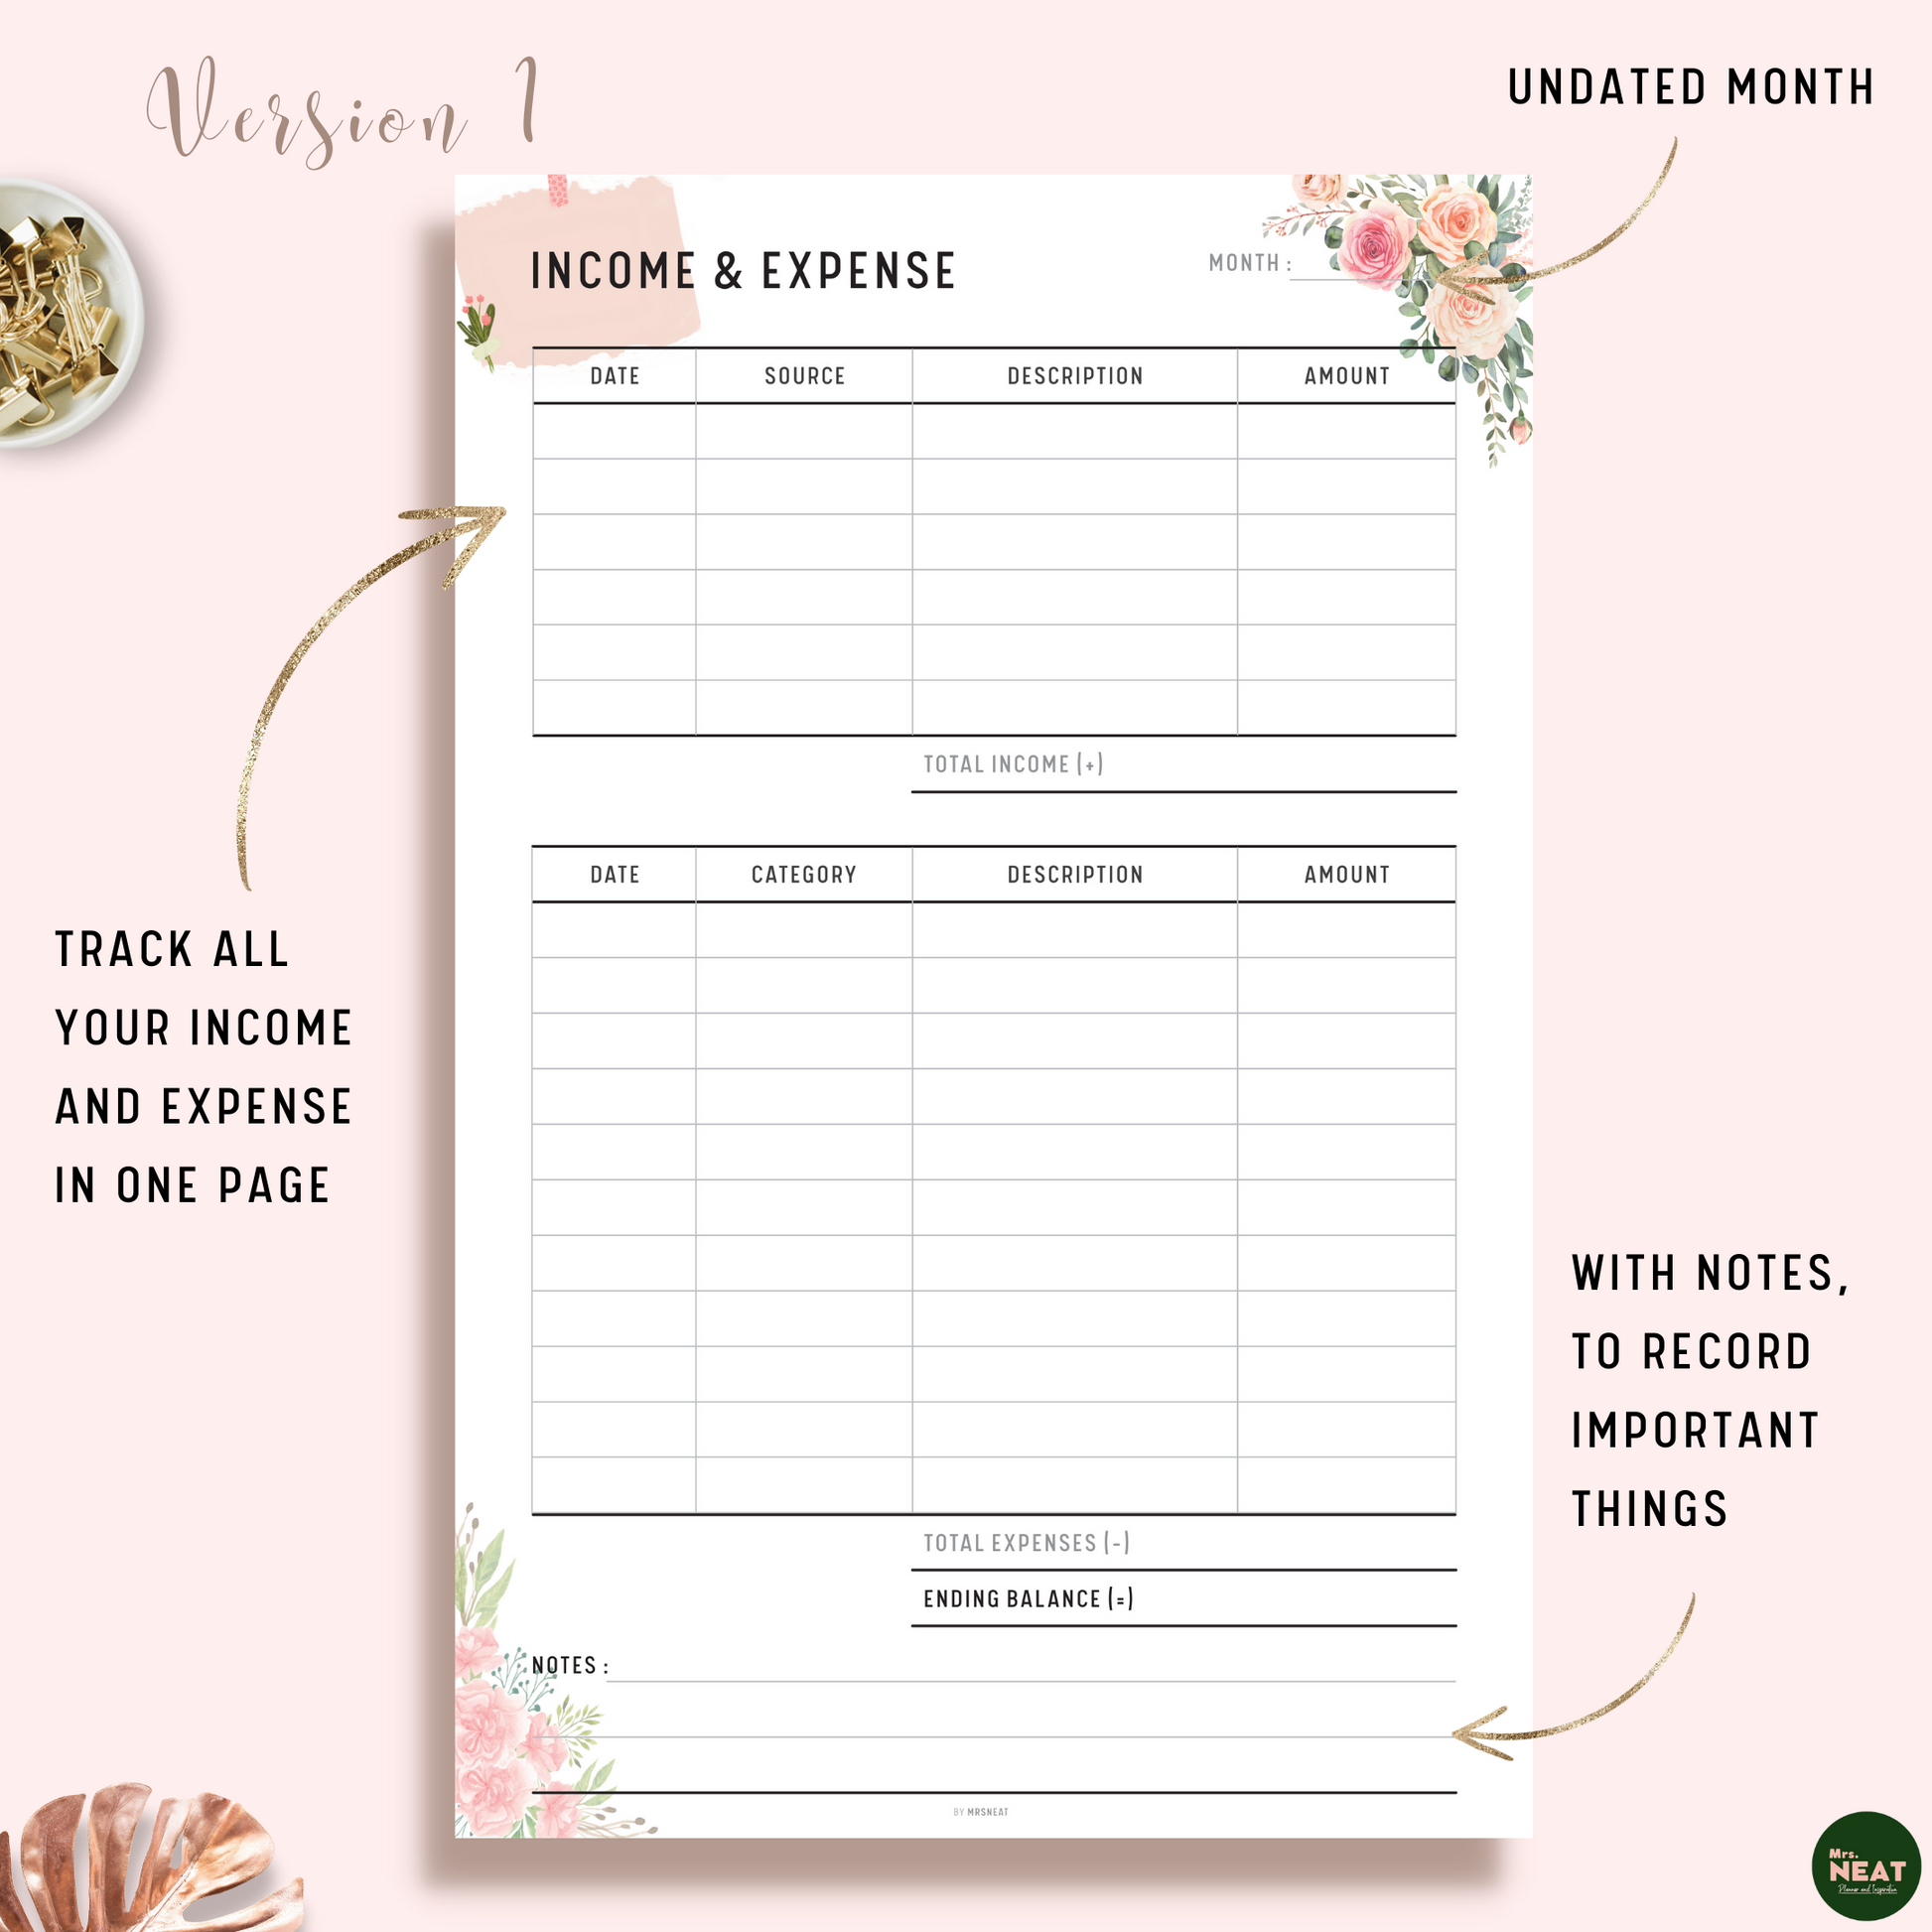 Cute Pink Floral Income and Expense Tracker Planner with room for income, expense and notes